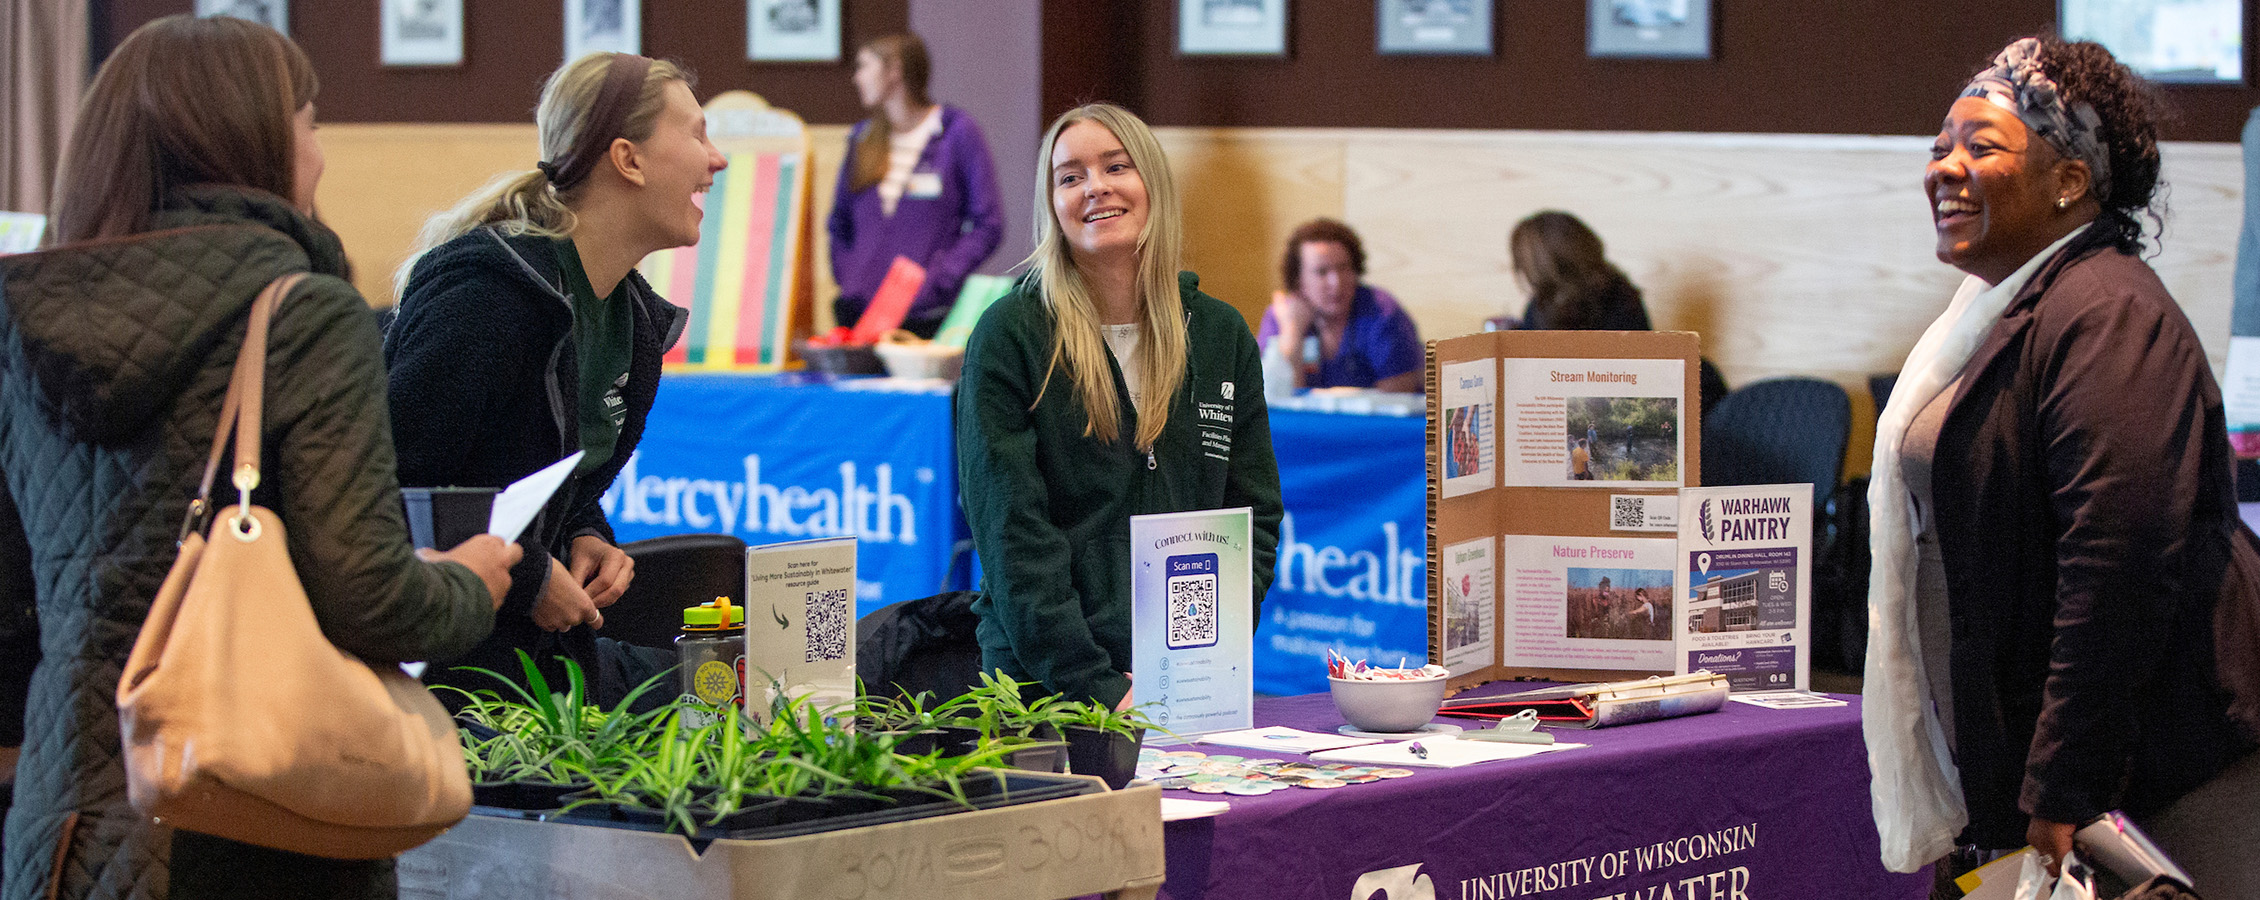 Help for caring for your health and wellness at UW-Whitewater